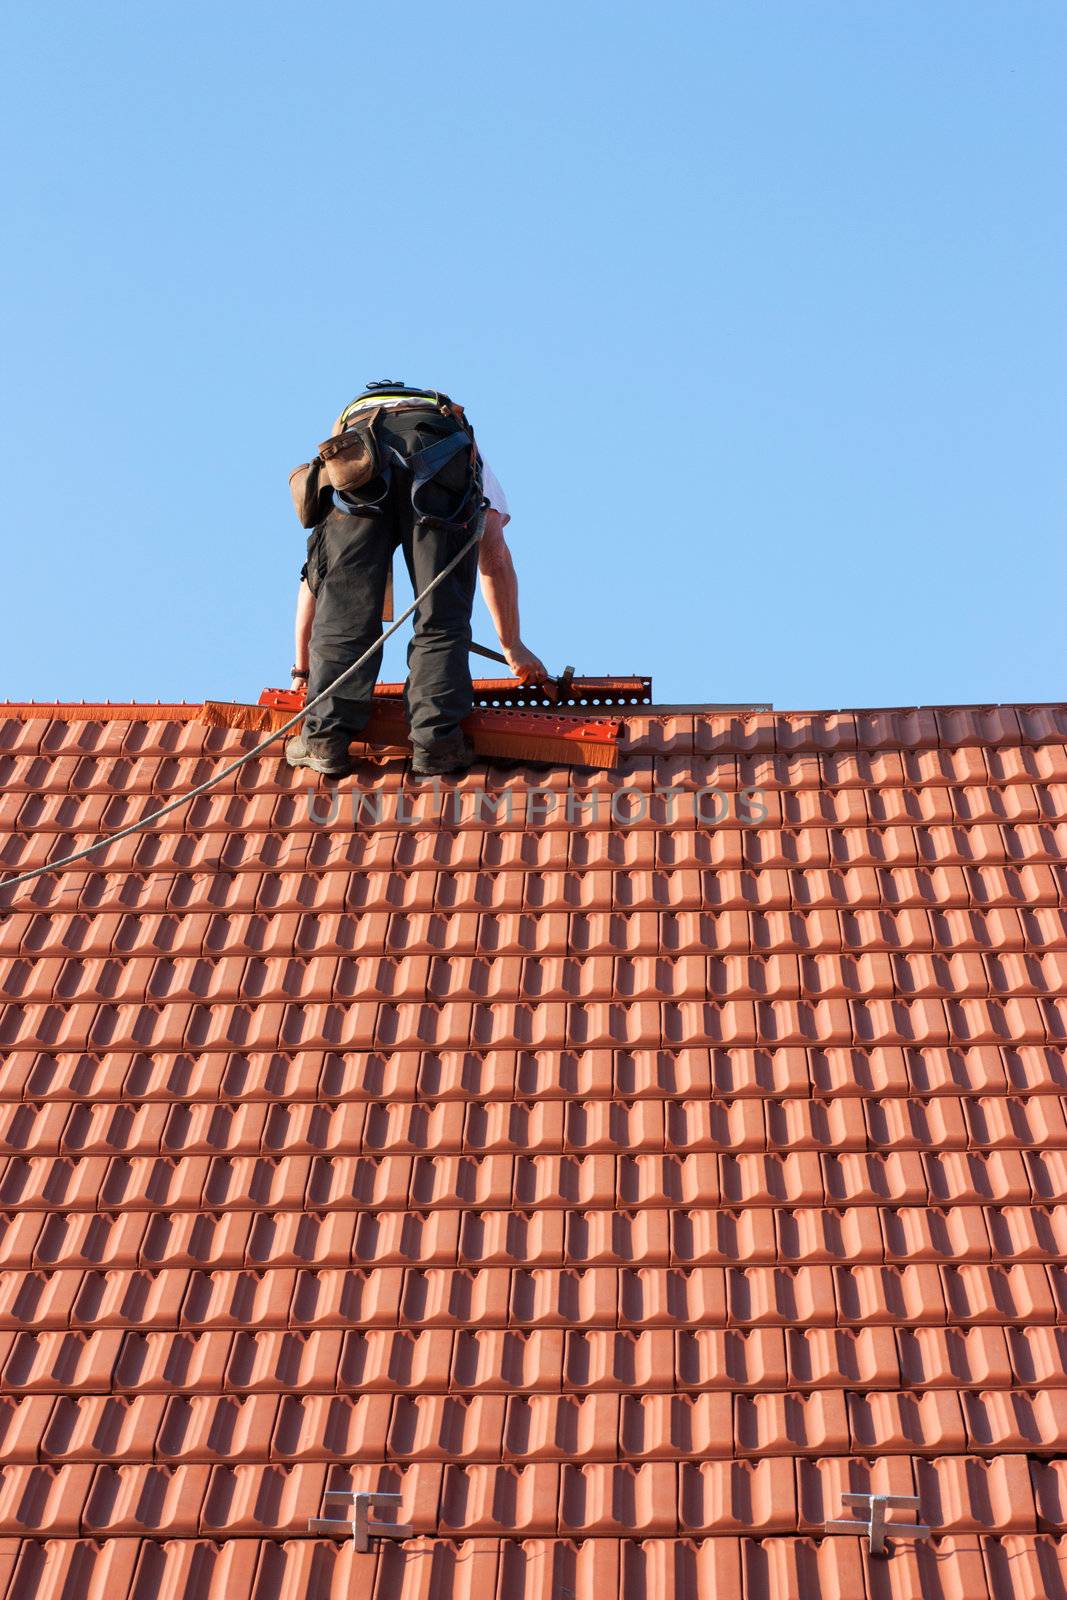 Roofer finishing laying the tiles on the roof of a building